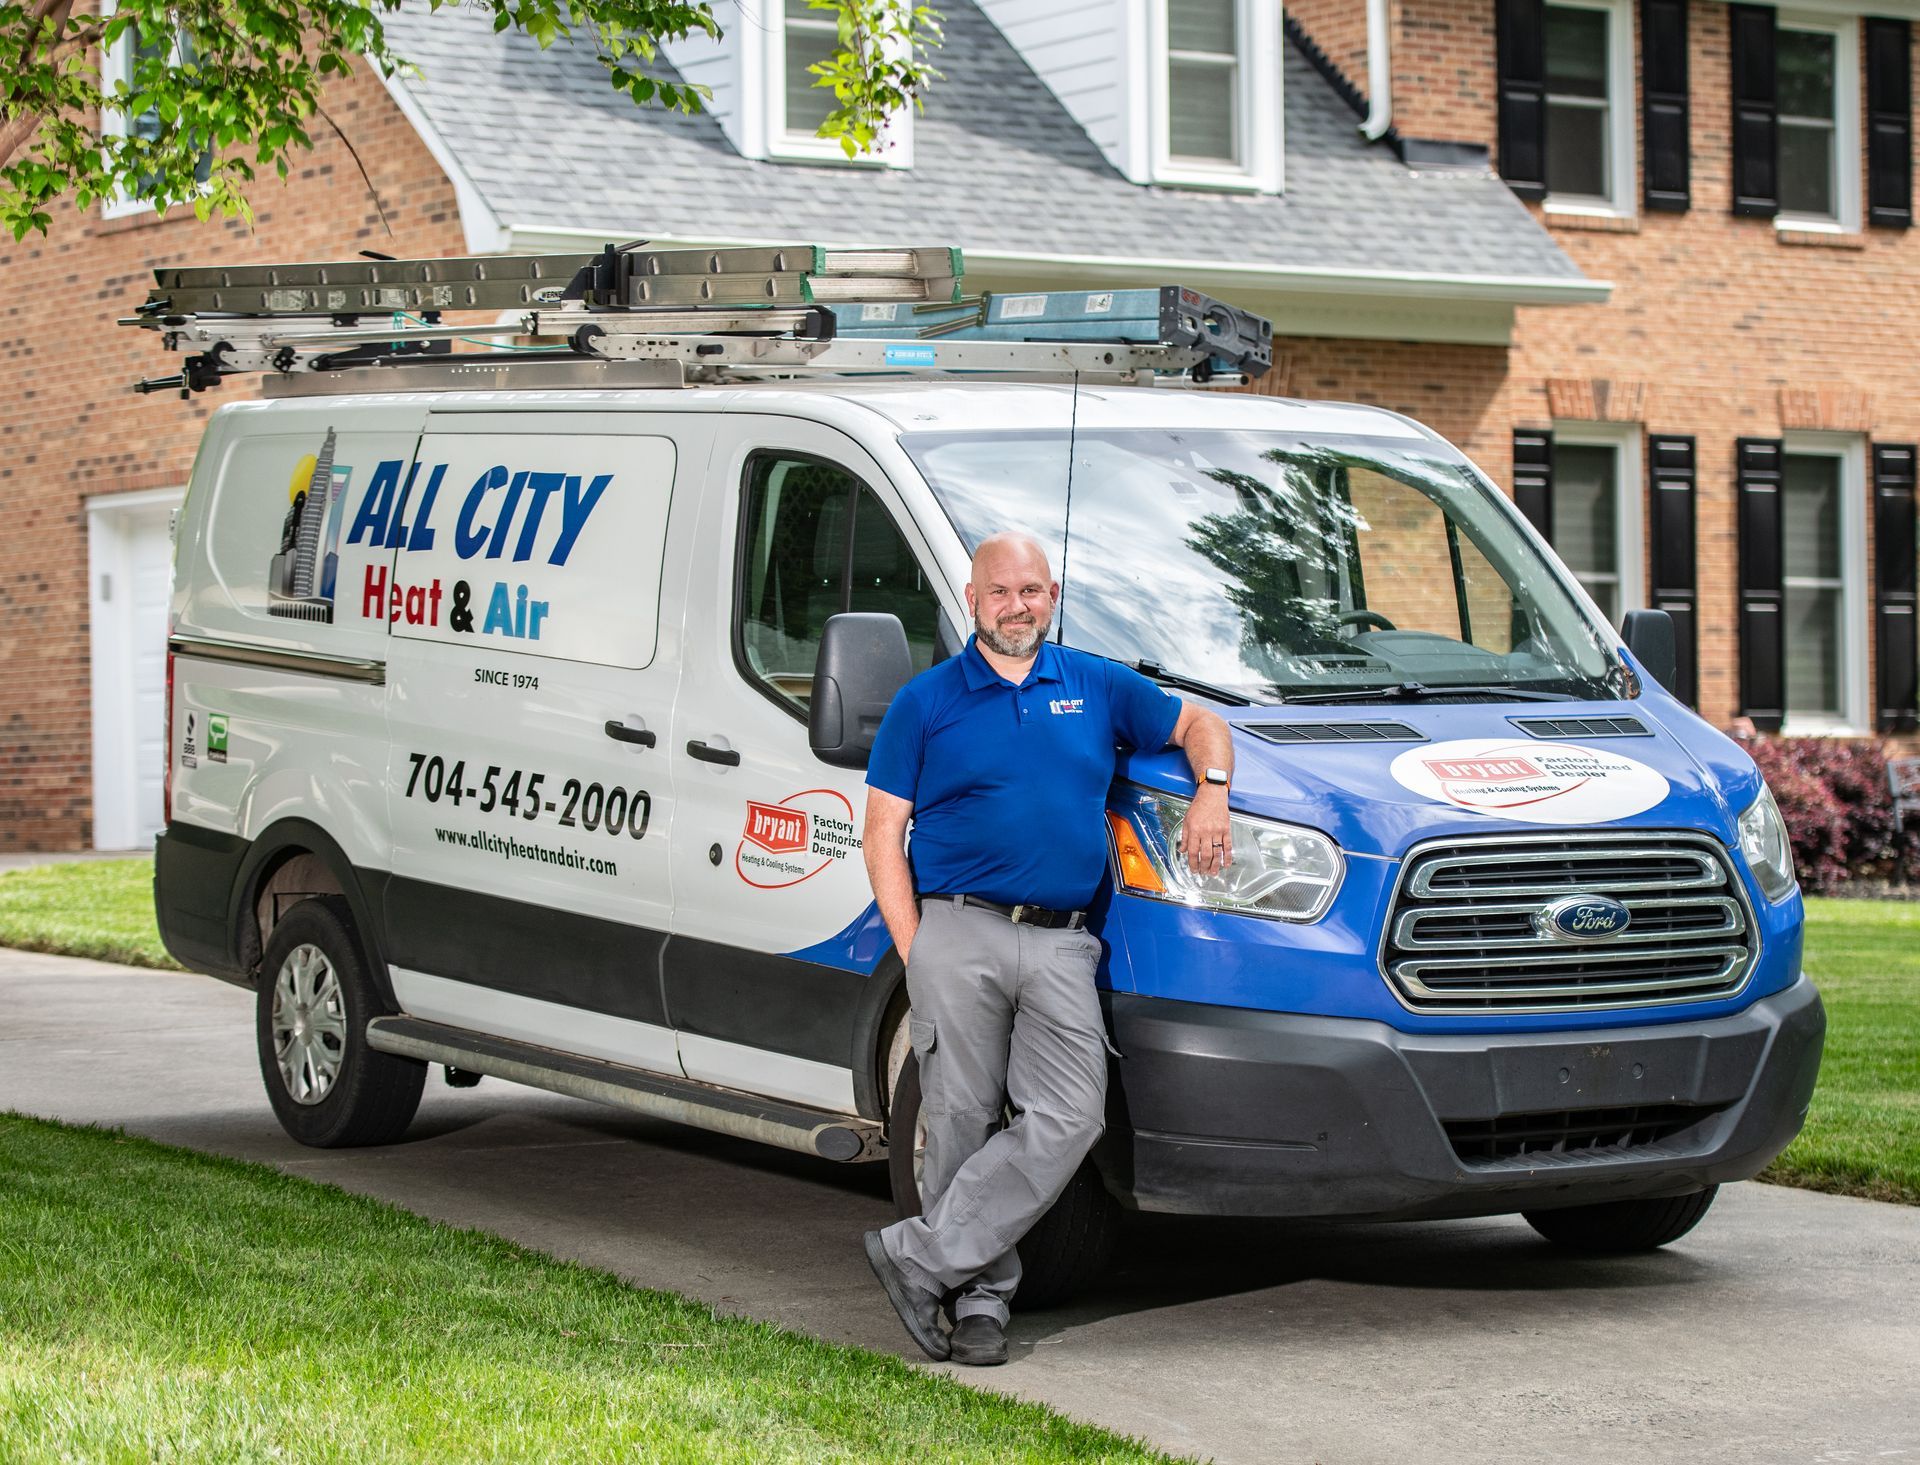 An All City Heat and Air technician is standing next to a van in front of a house.